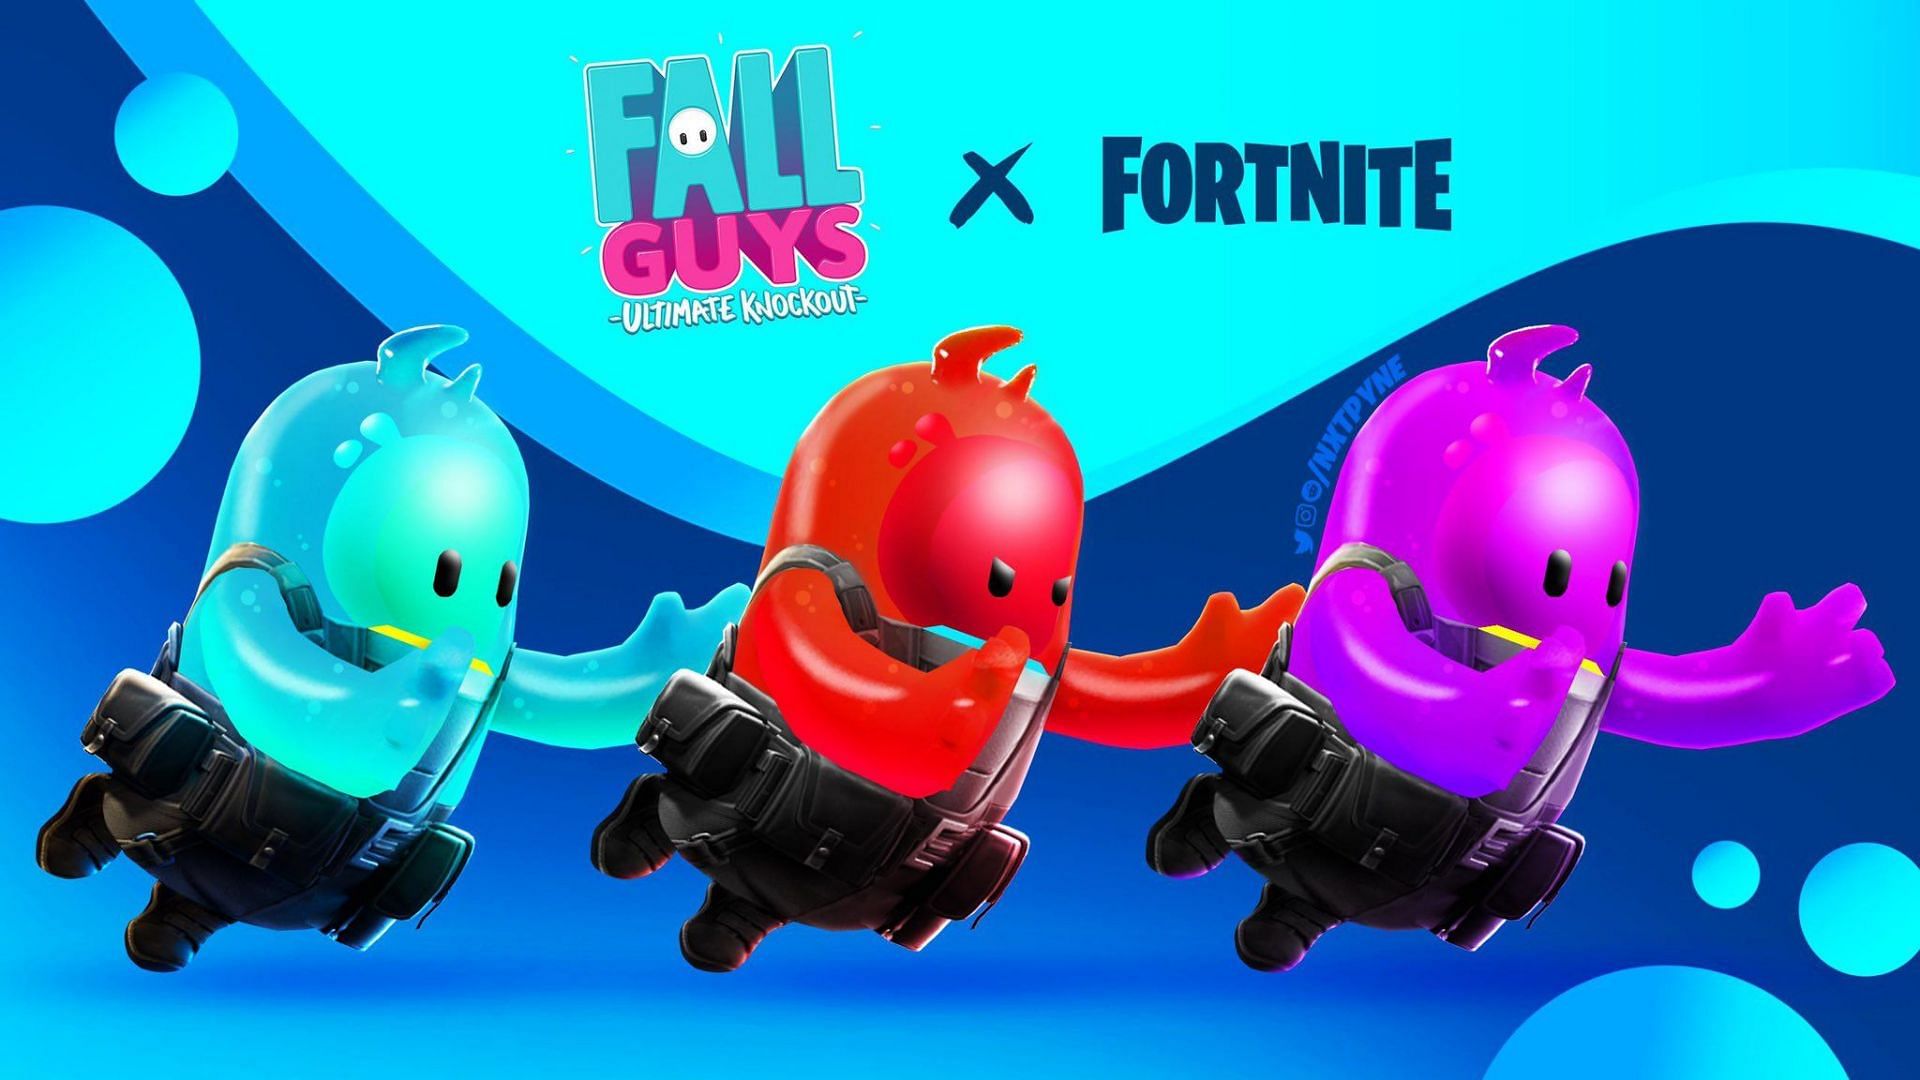 Fortnite x Fall Guys collaboration seems to be back on the table (Image via nxtpyne/Twitter)